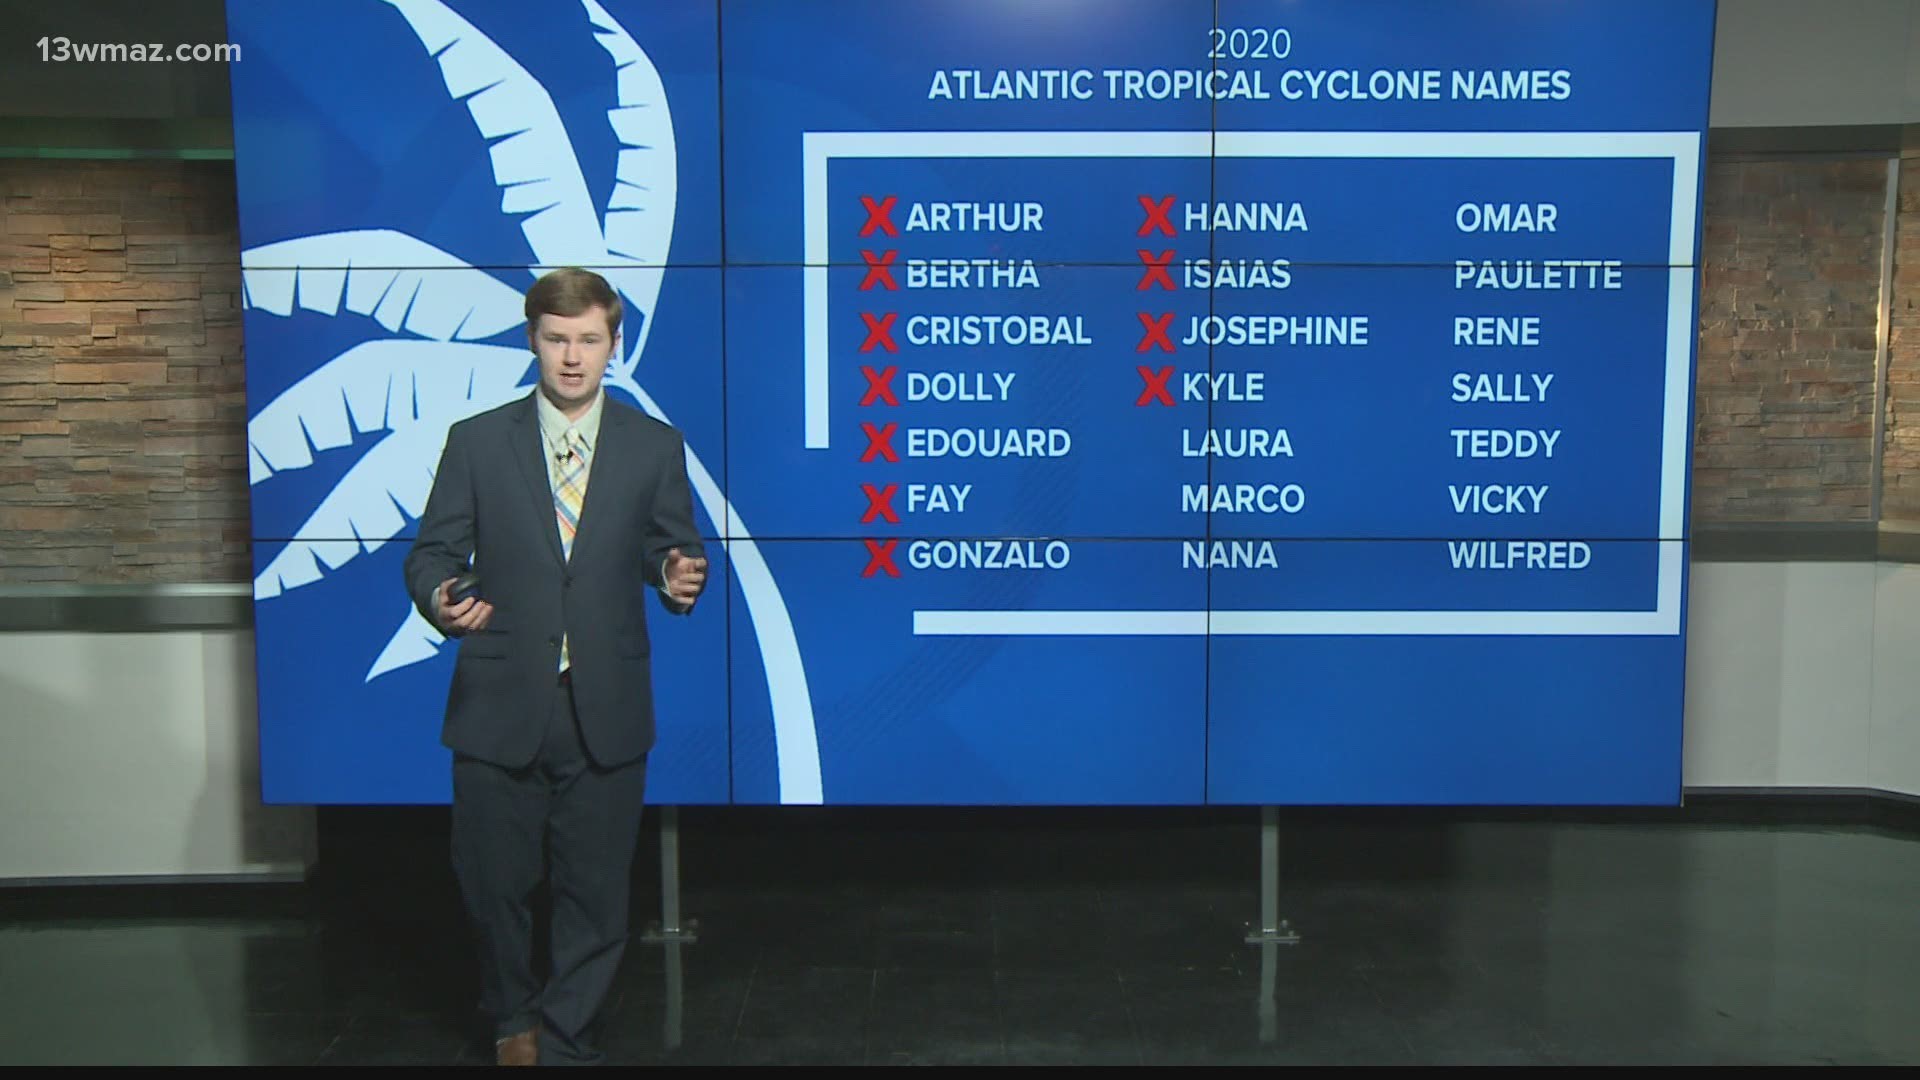 2020 brings the potential to use up all 21 Atlantic tropical storm or hurricane names for the first time since 2005.